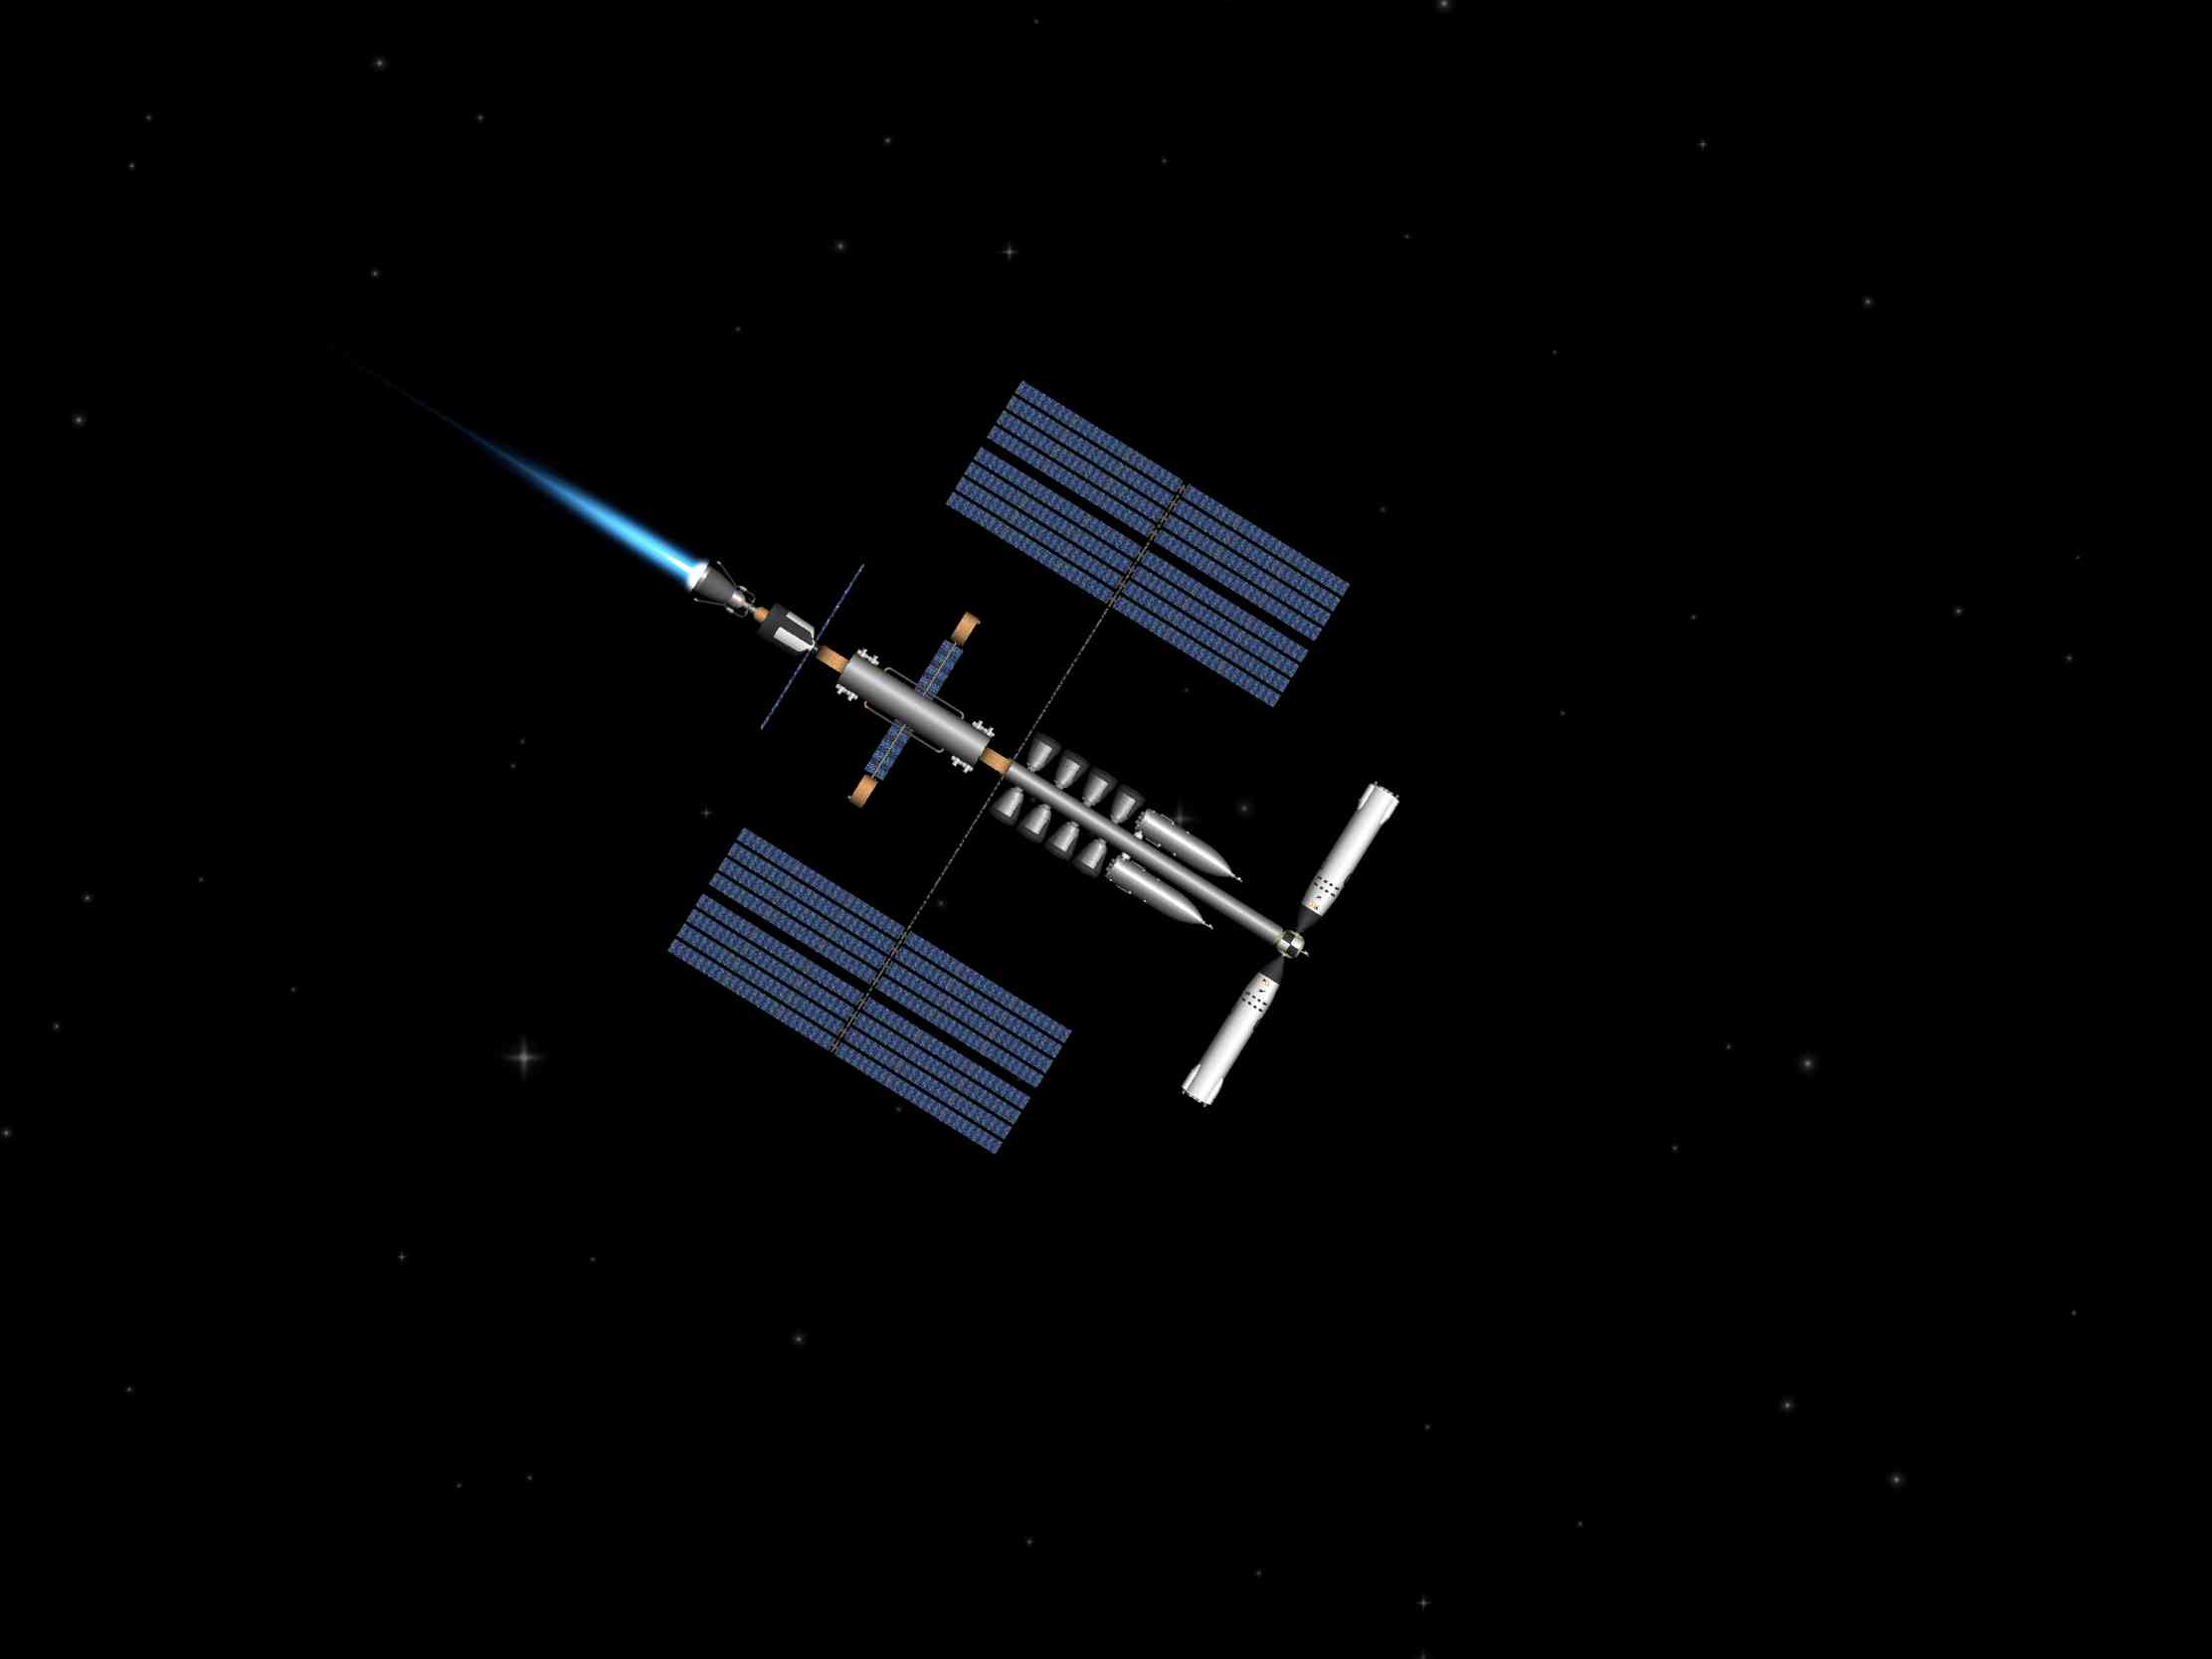 Judgement Day Space Station Blueprint for Spaceflight Simulator